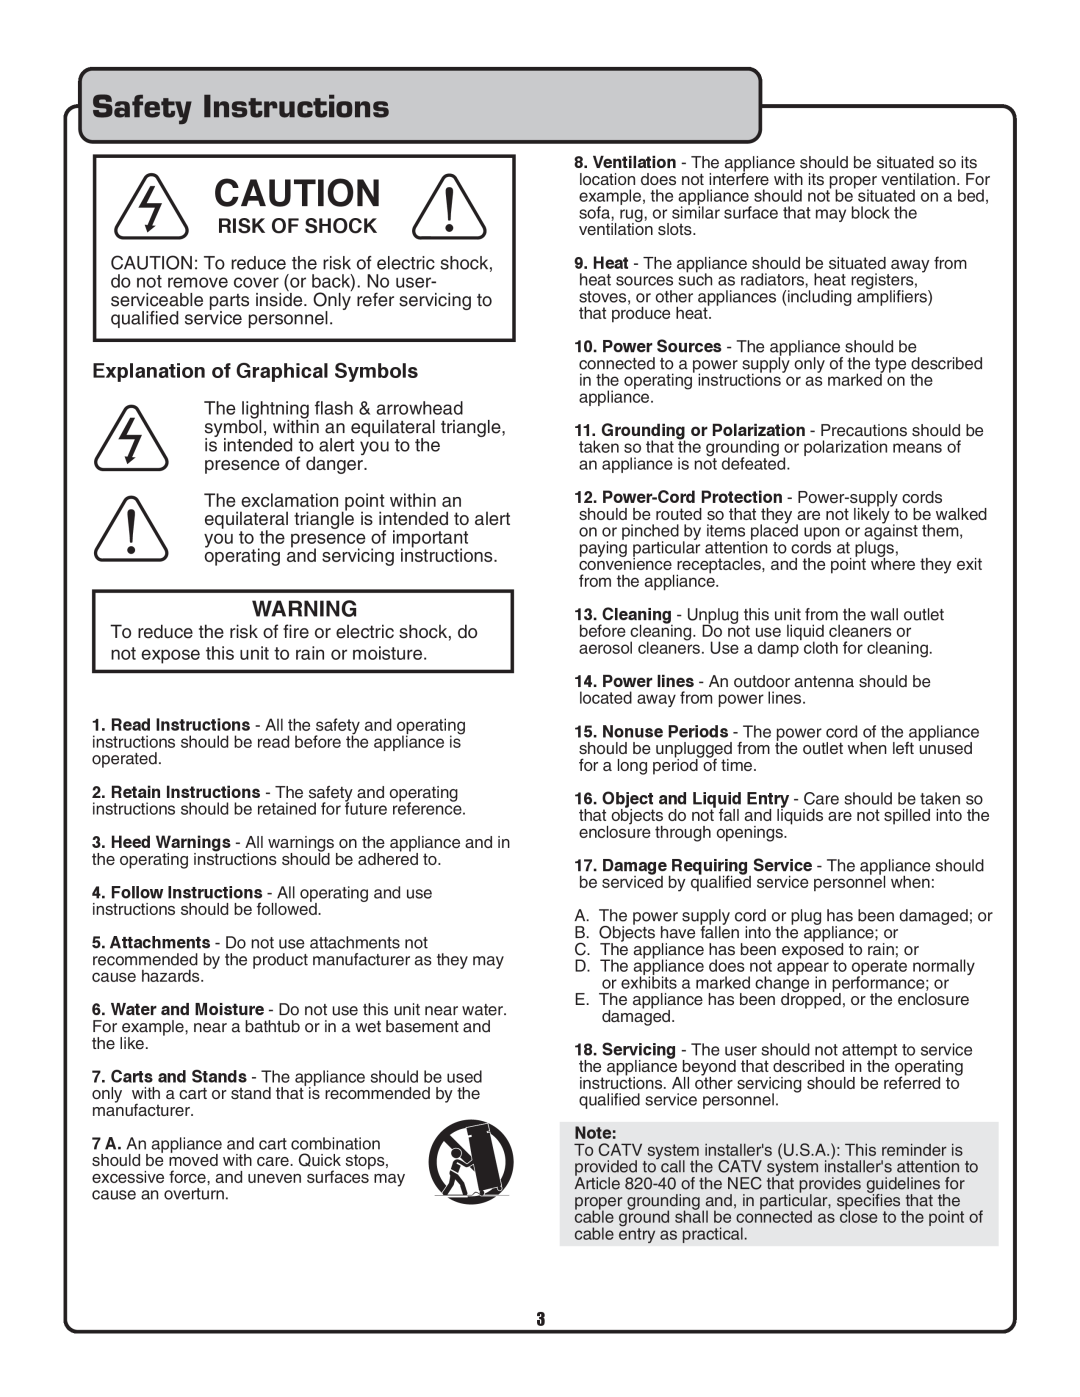 VocoPro CDG-9000 owner manual Safety Instructions, Risk Of Shock, Explanation of Graphical Symbols 